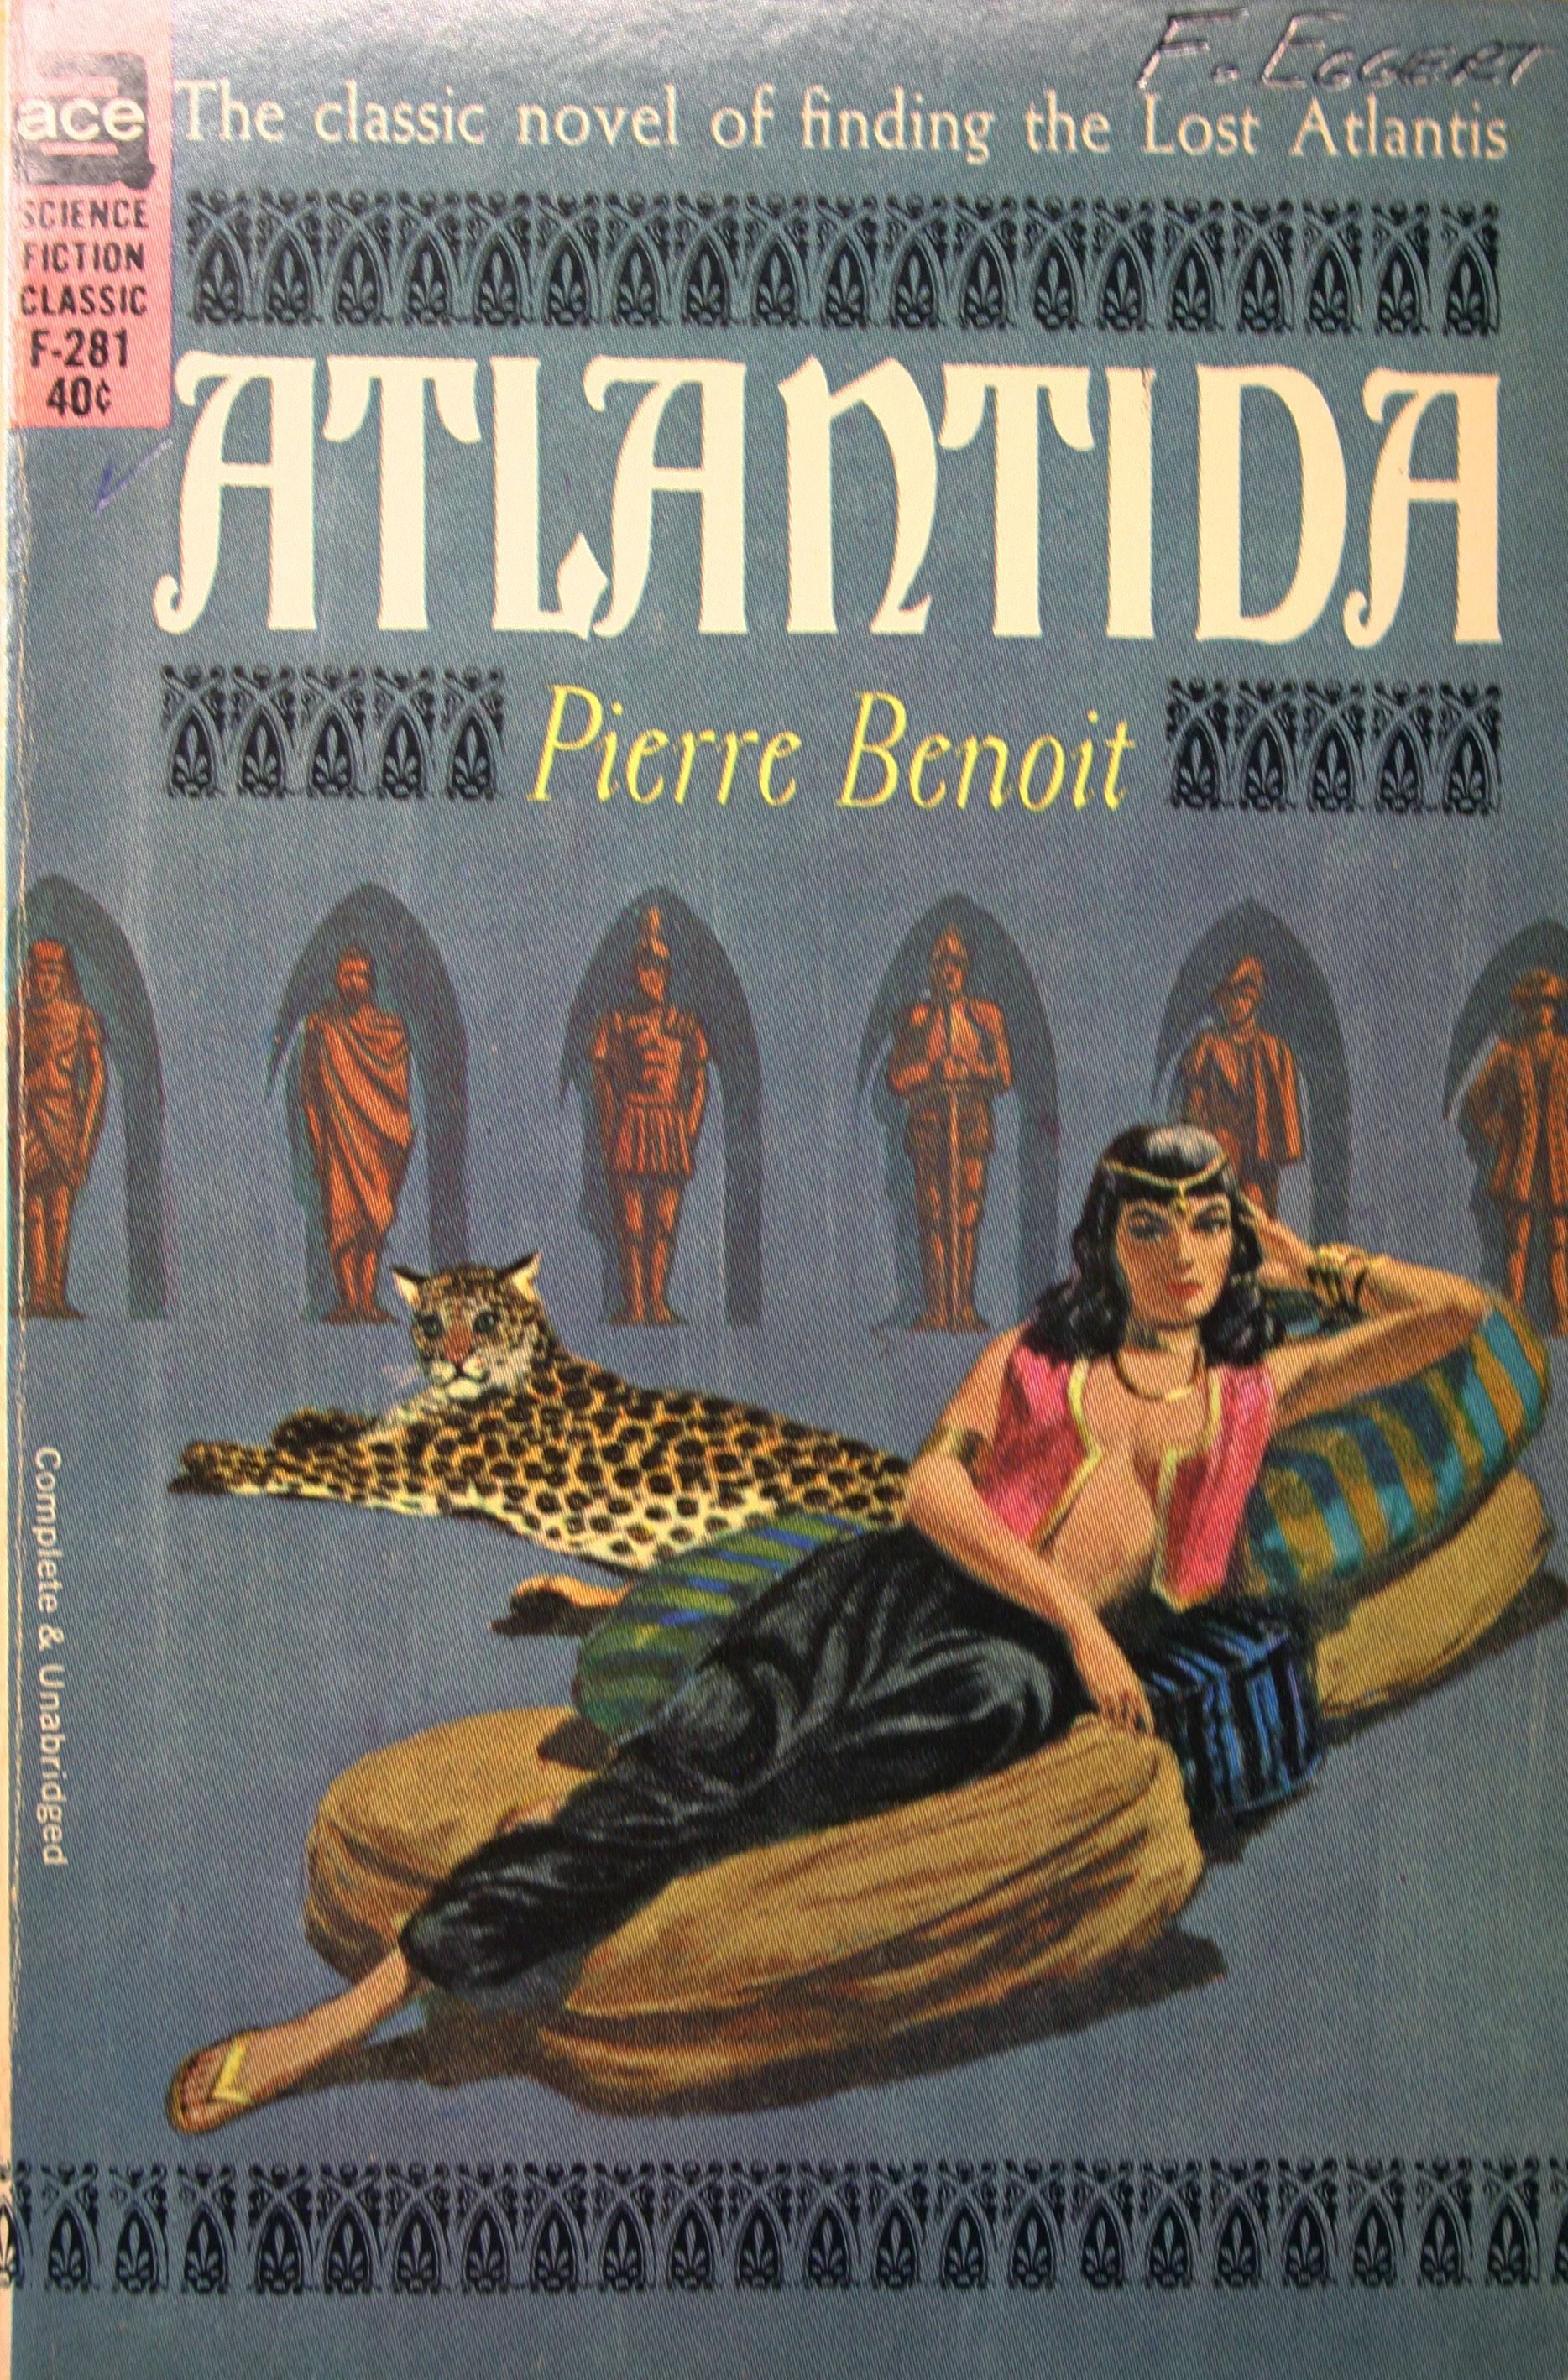 This image is of the cover of the pulp fiction work, titled 'Atlantida', by Pierre Benoit. It was published in 1920. From the UB Libraries - George Kelley Pulp Fiction Collection